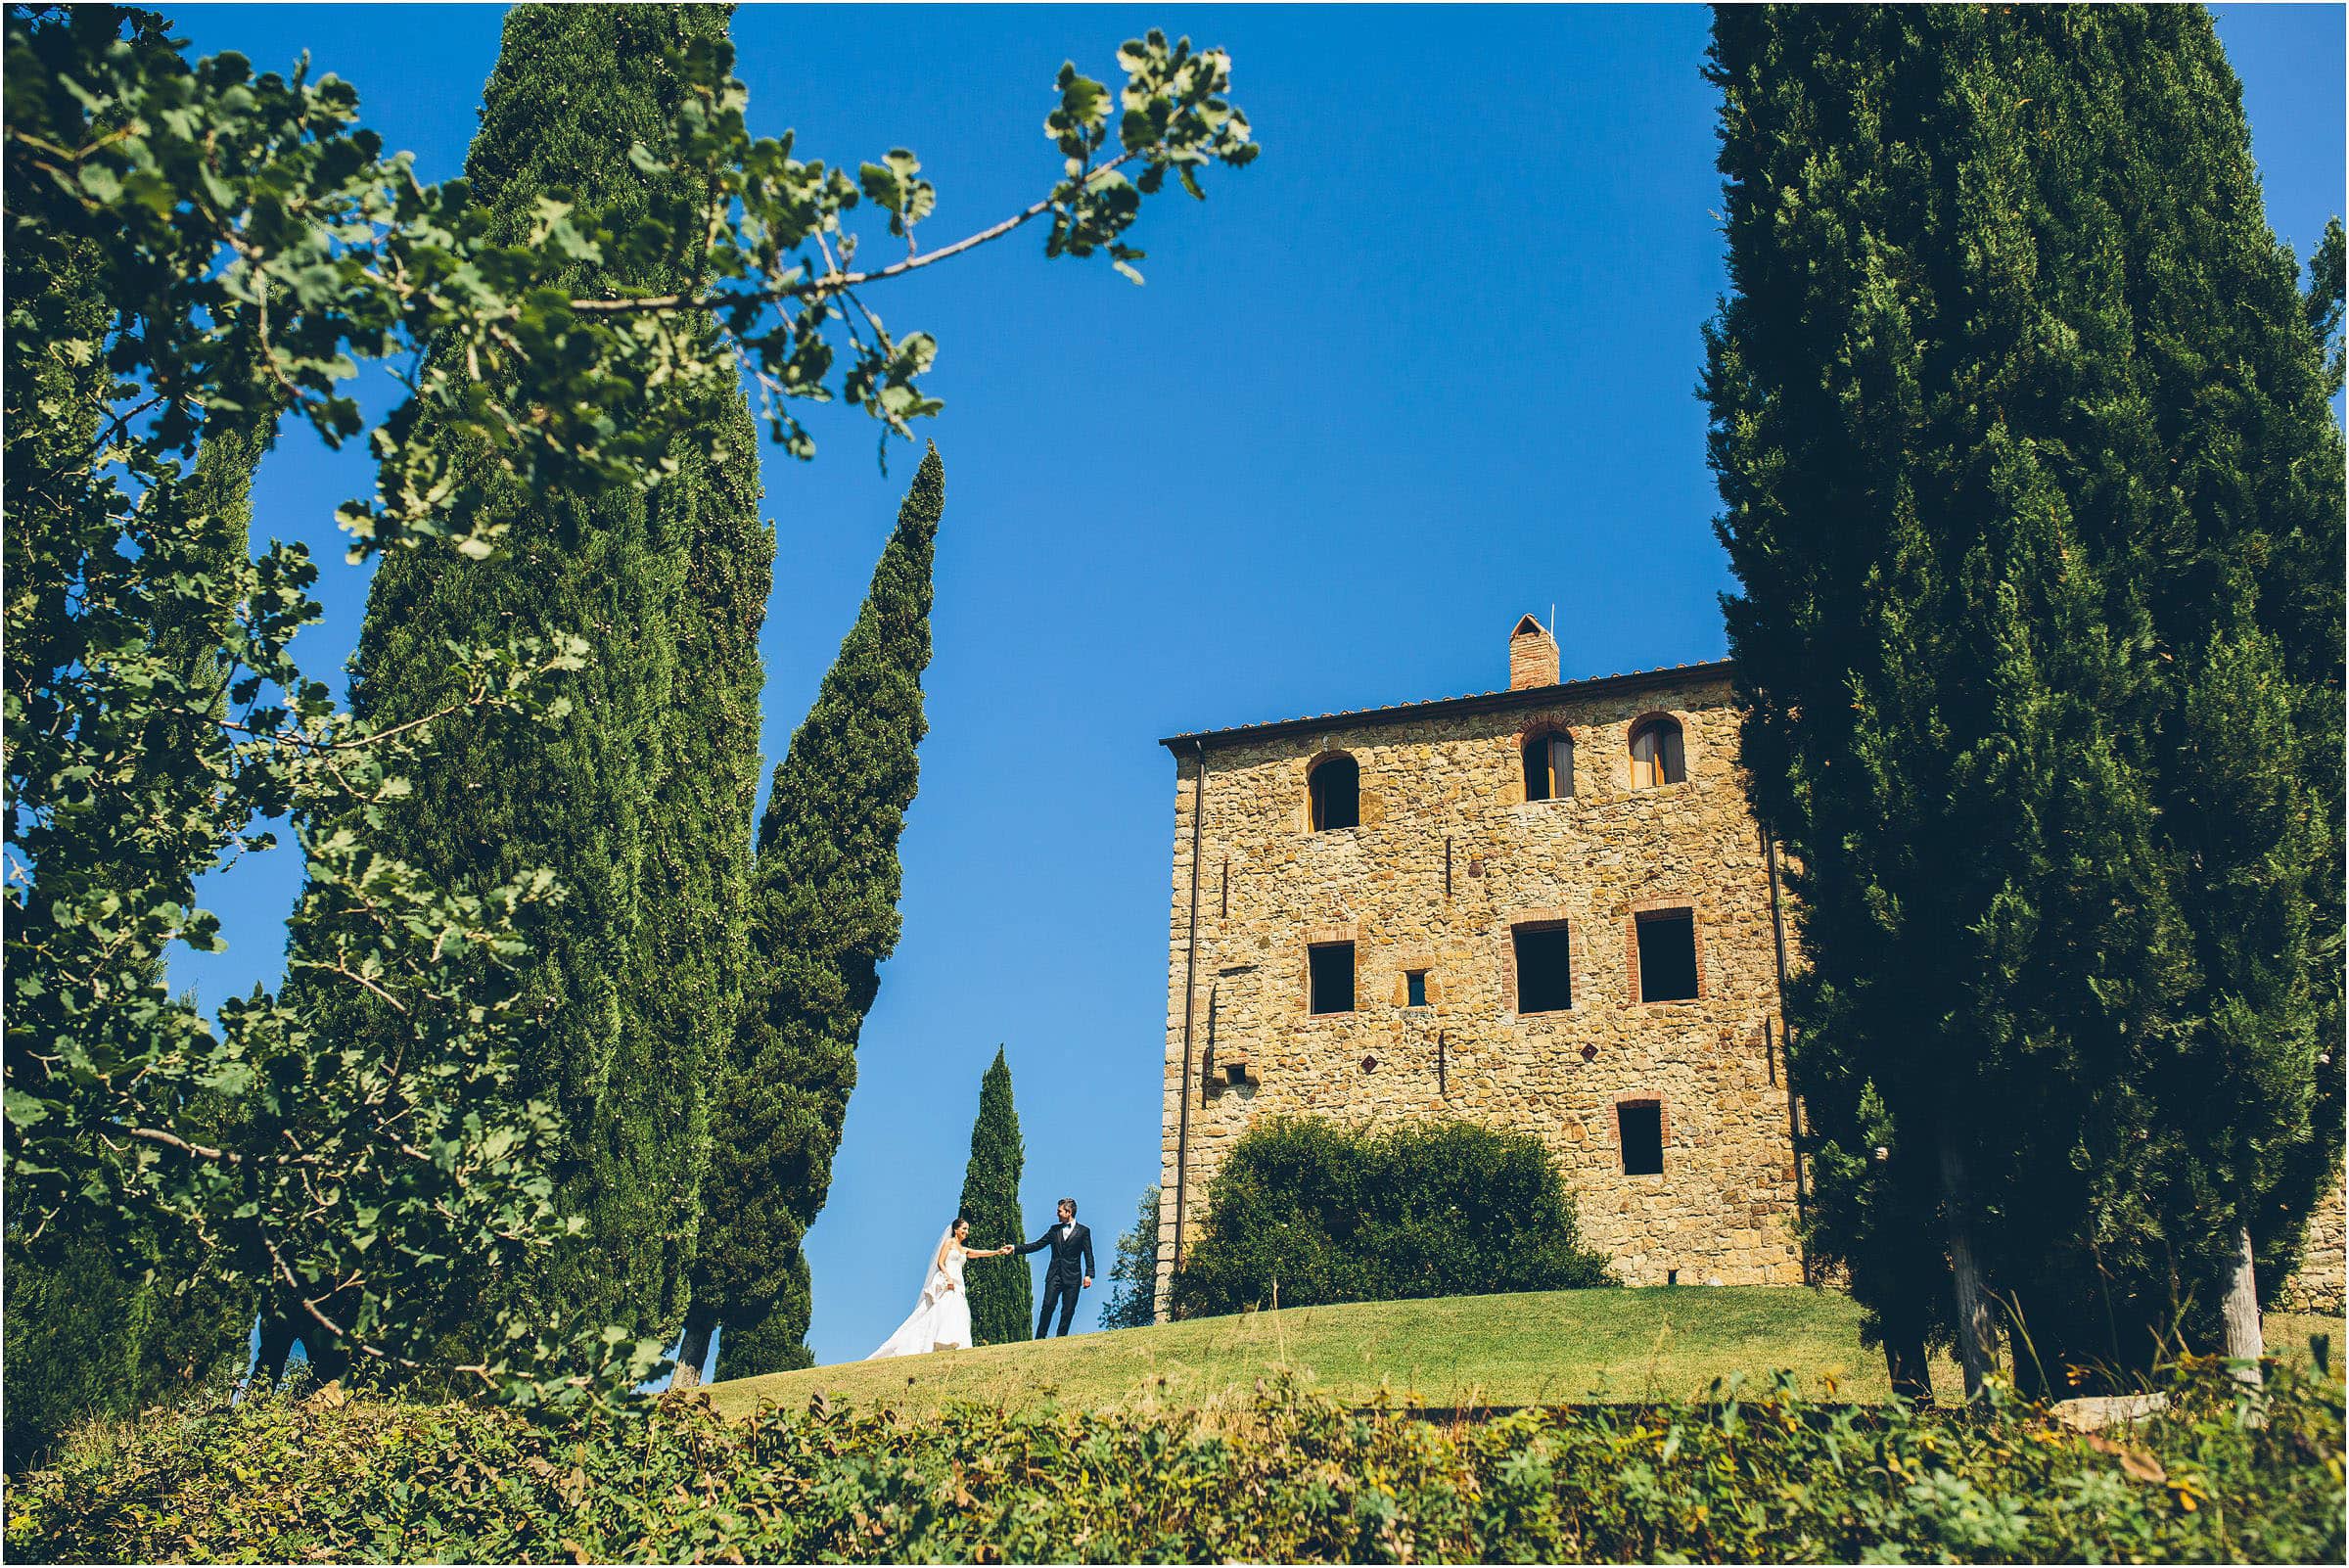 A bride and groom in a classic pose from The Crawleys outside Castello di Vicarello in Tuscany on their wedding day